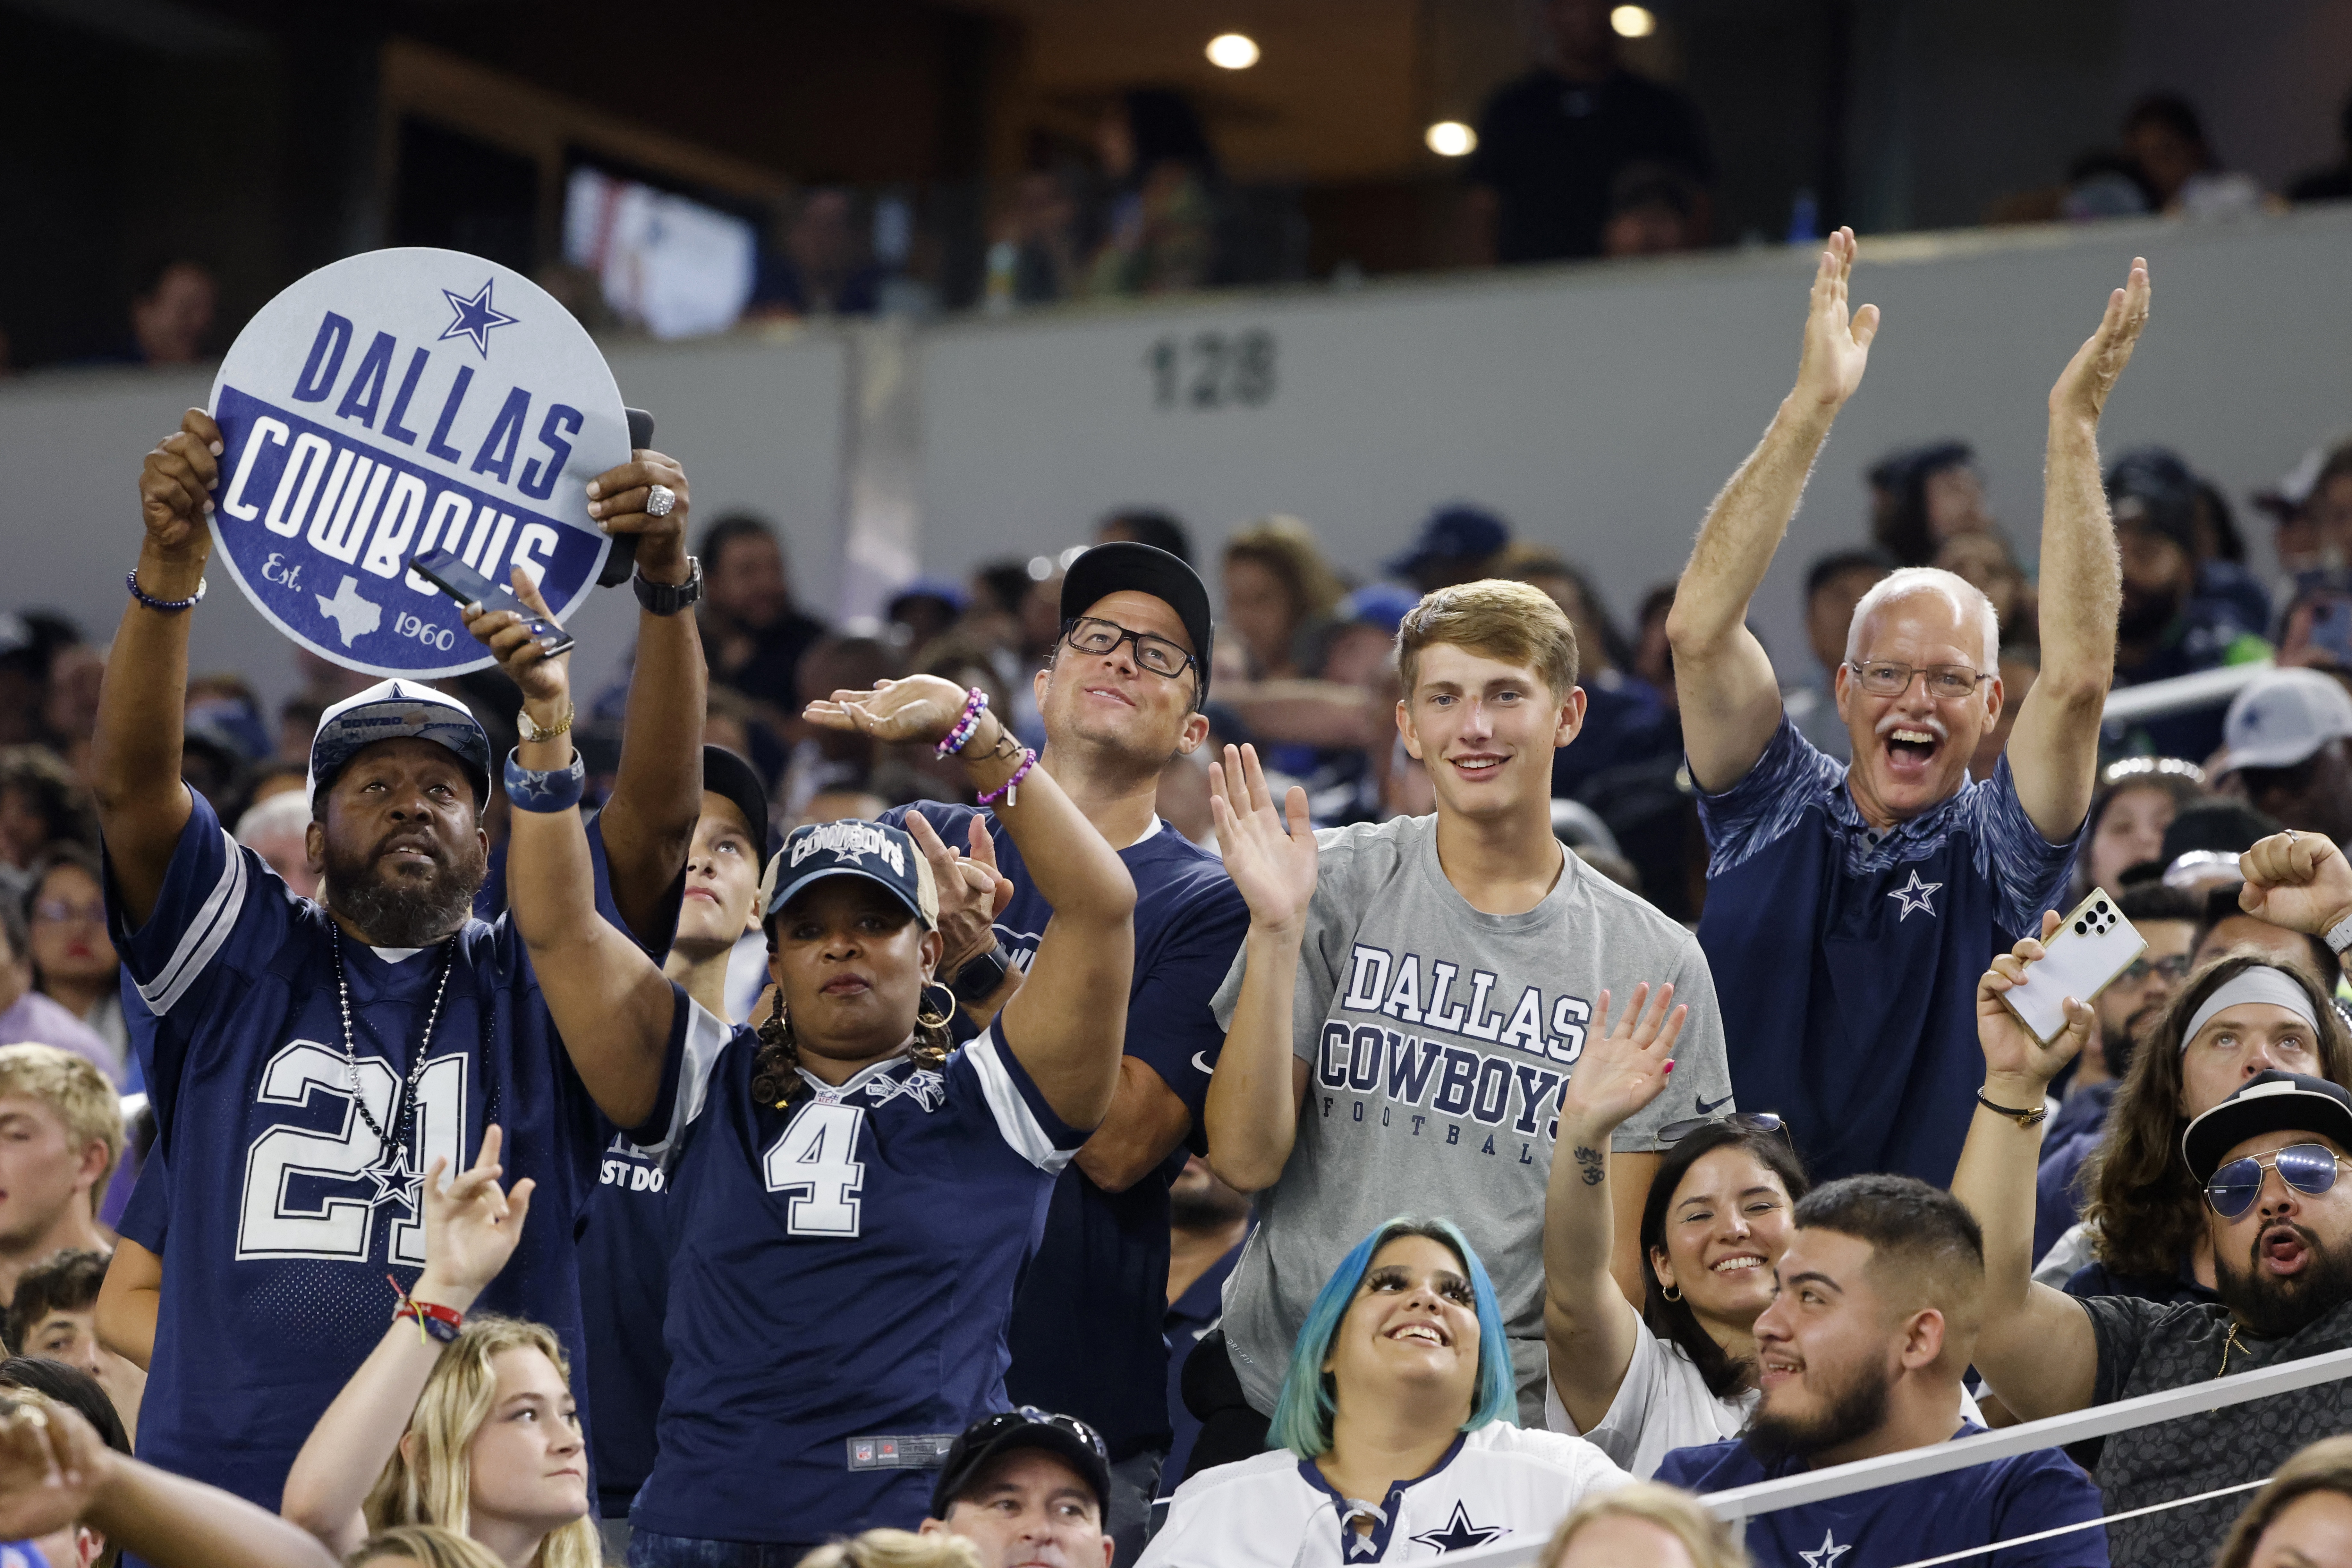 Cowboys are most 'in demand' team for 2022 season, according to ticket  broker